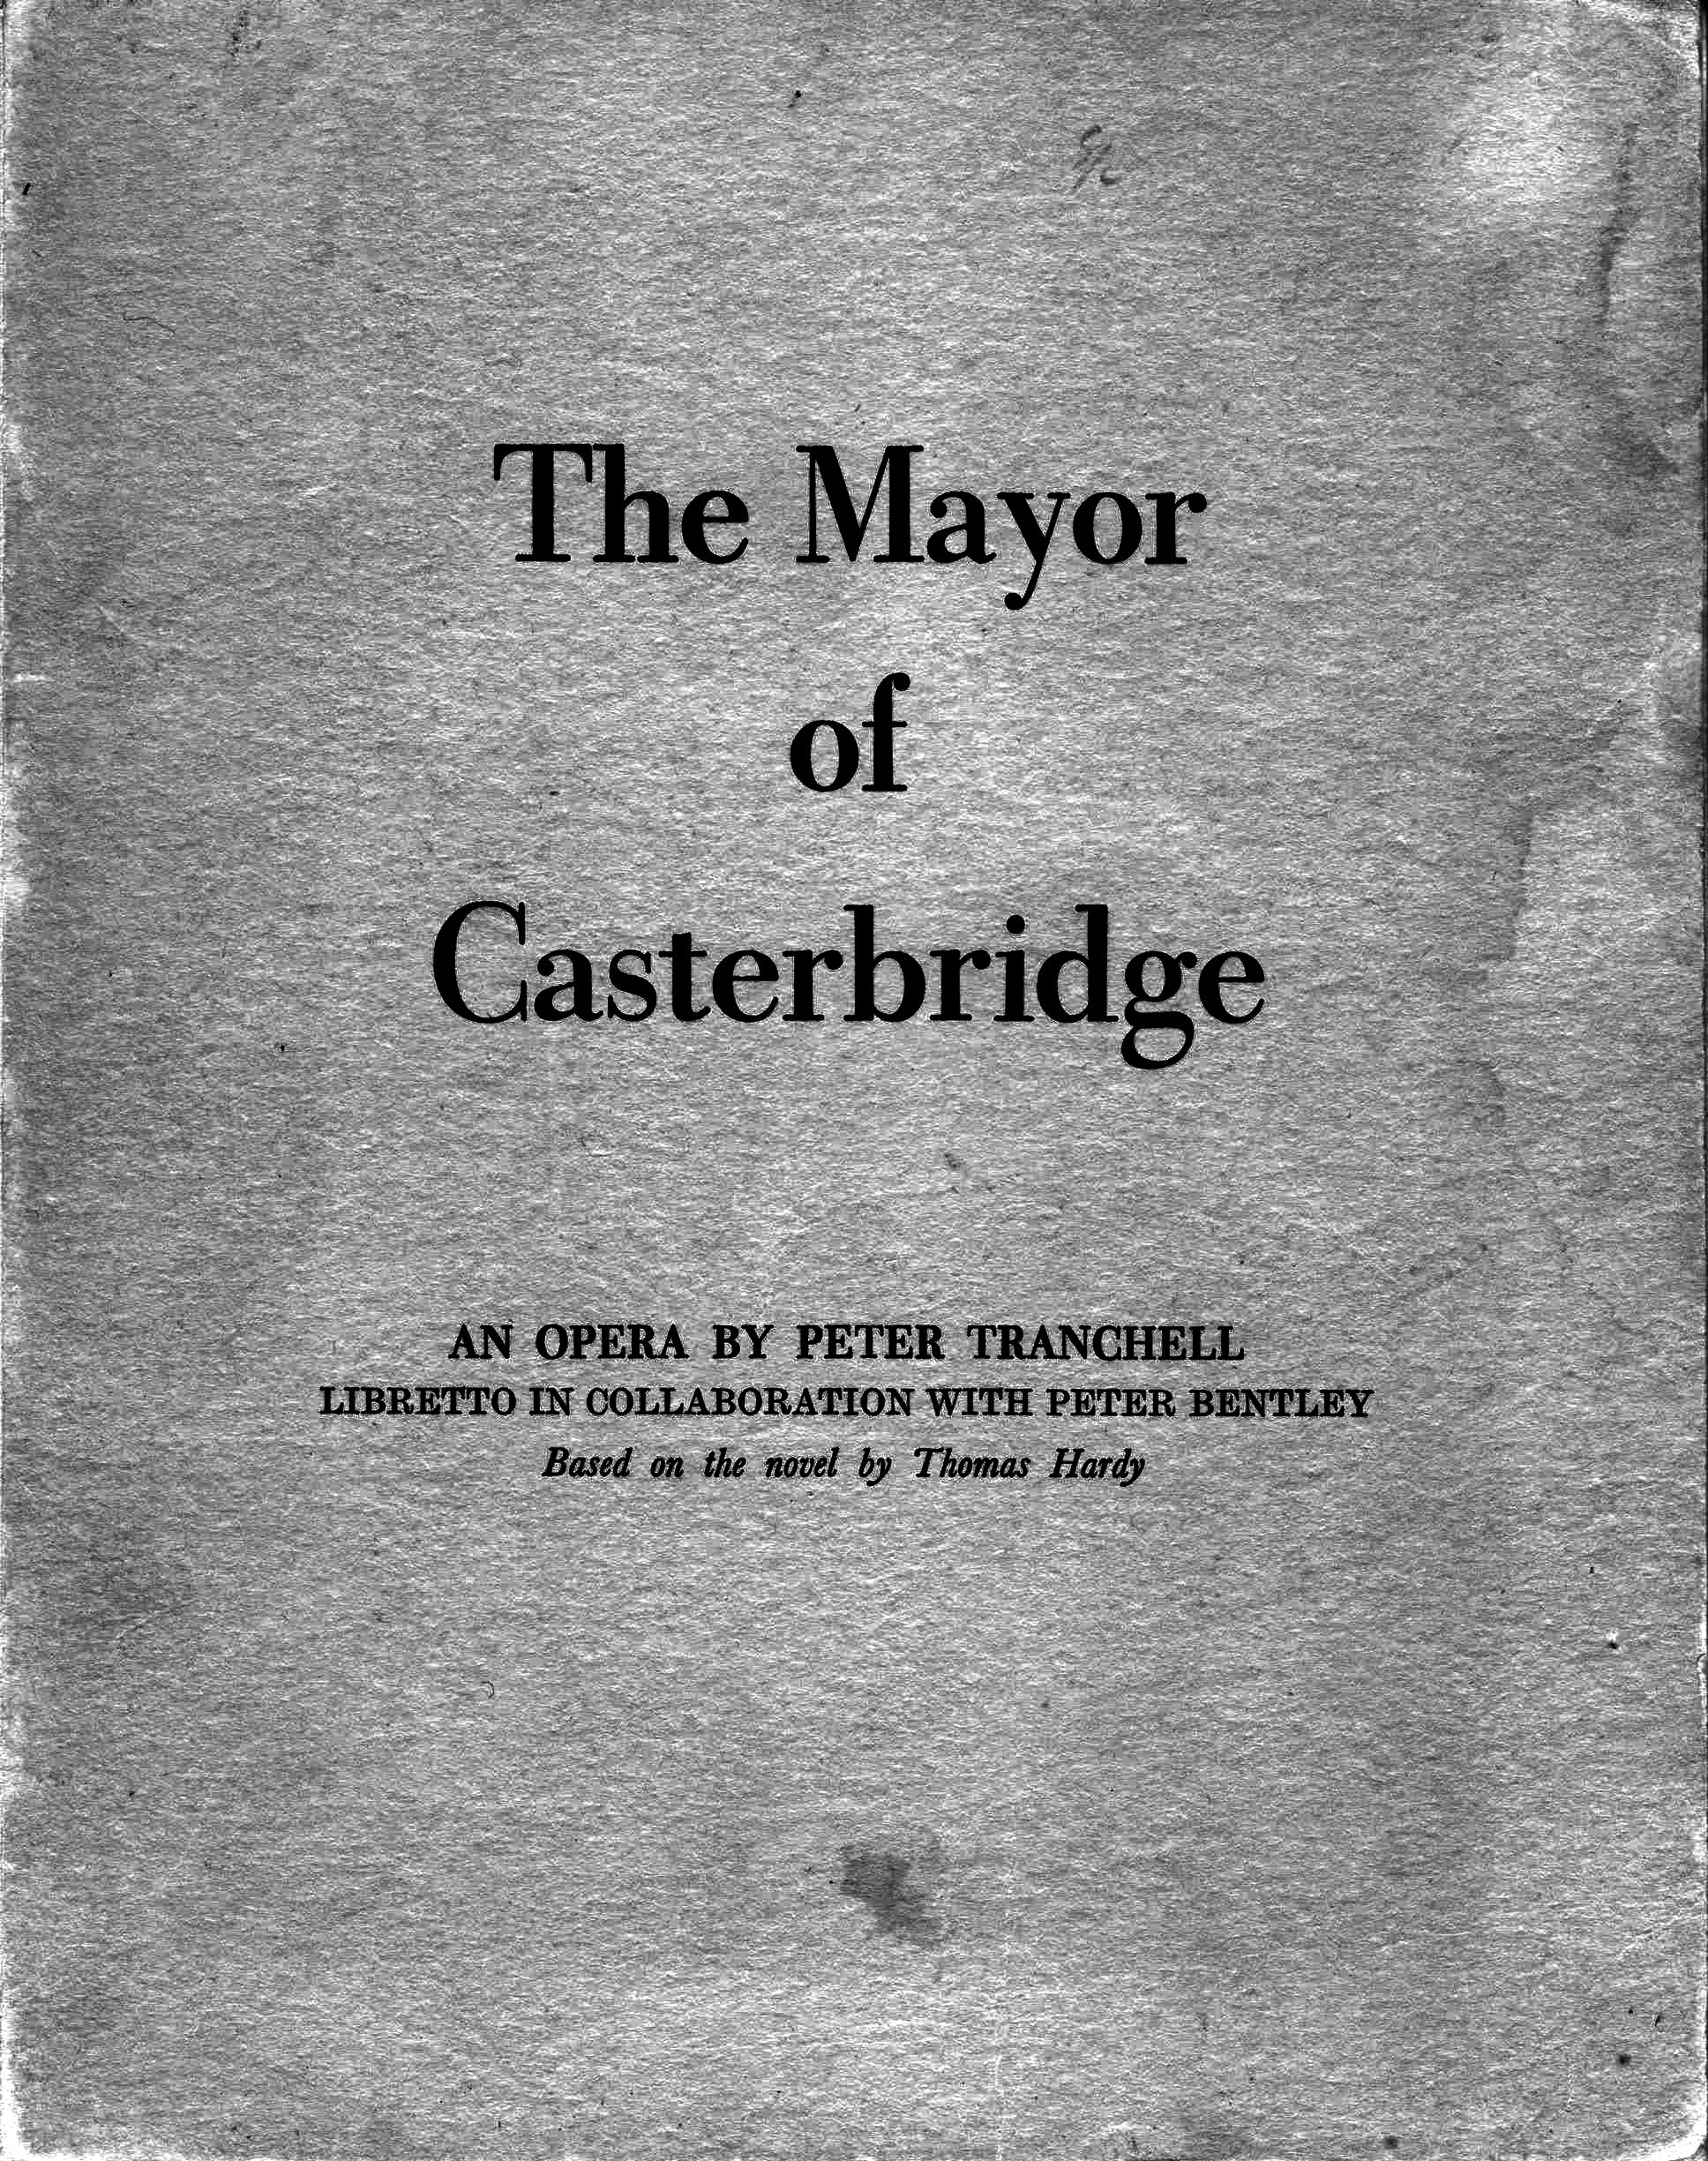 Front cover of the vocal score of The Mayor of Casterbridge, original edition, 1951